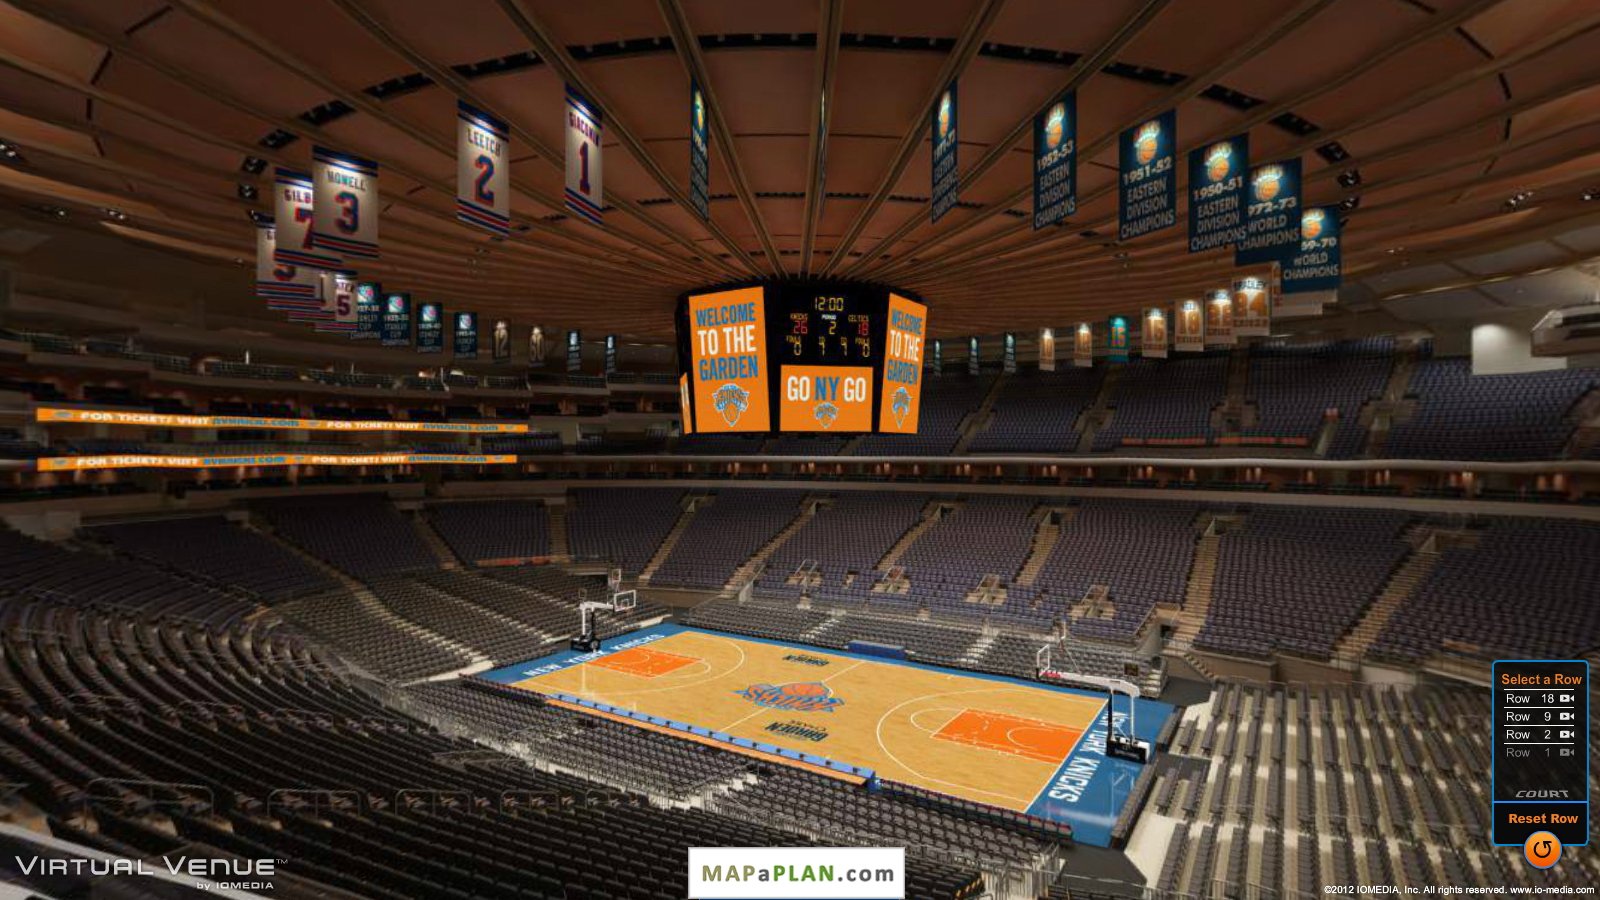 Madison square garden seating chart View from section 213